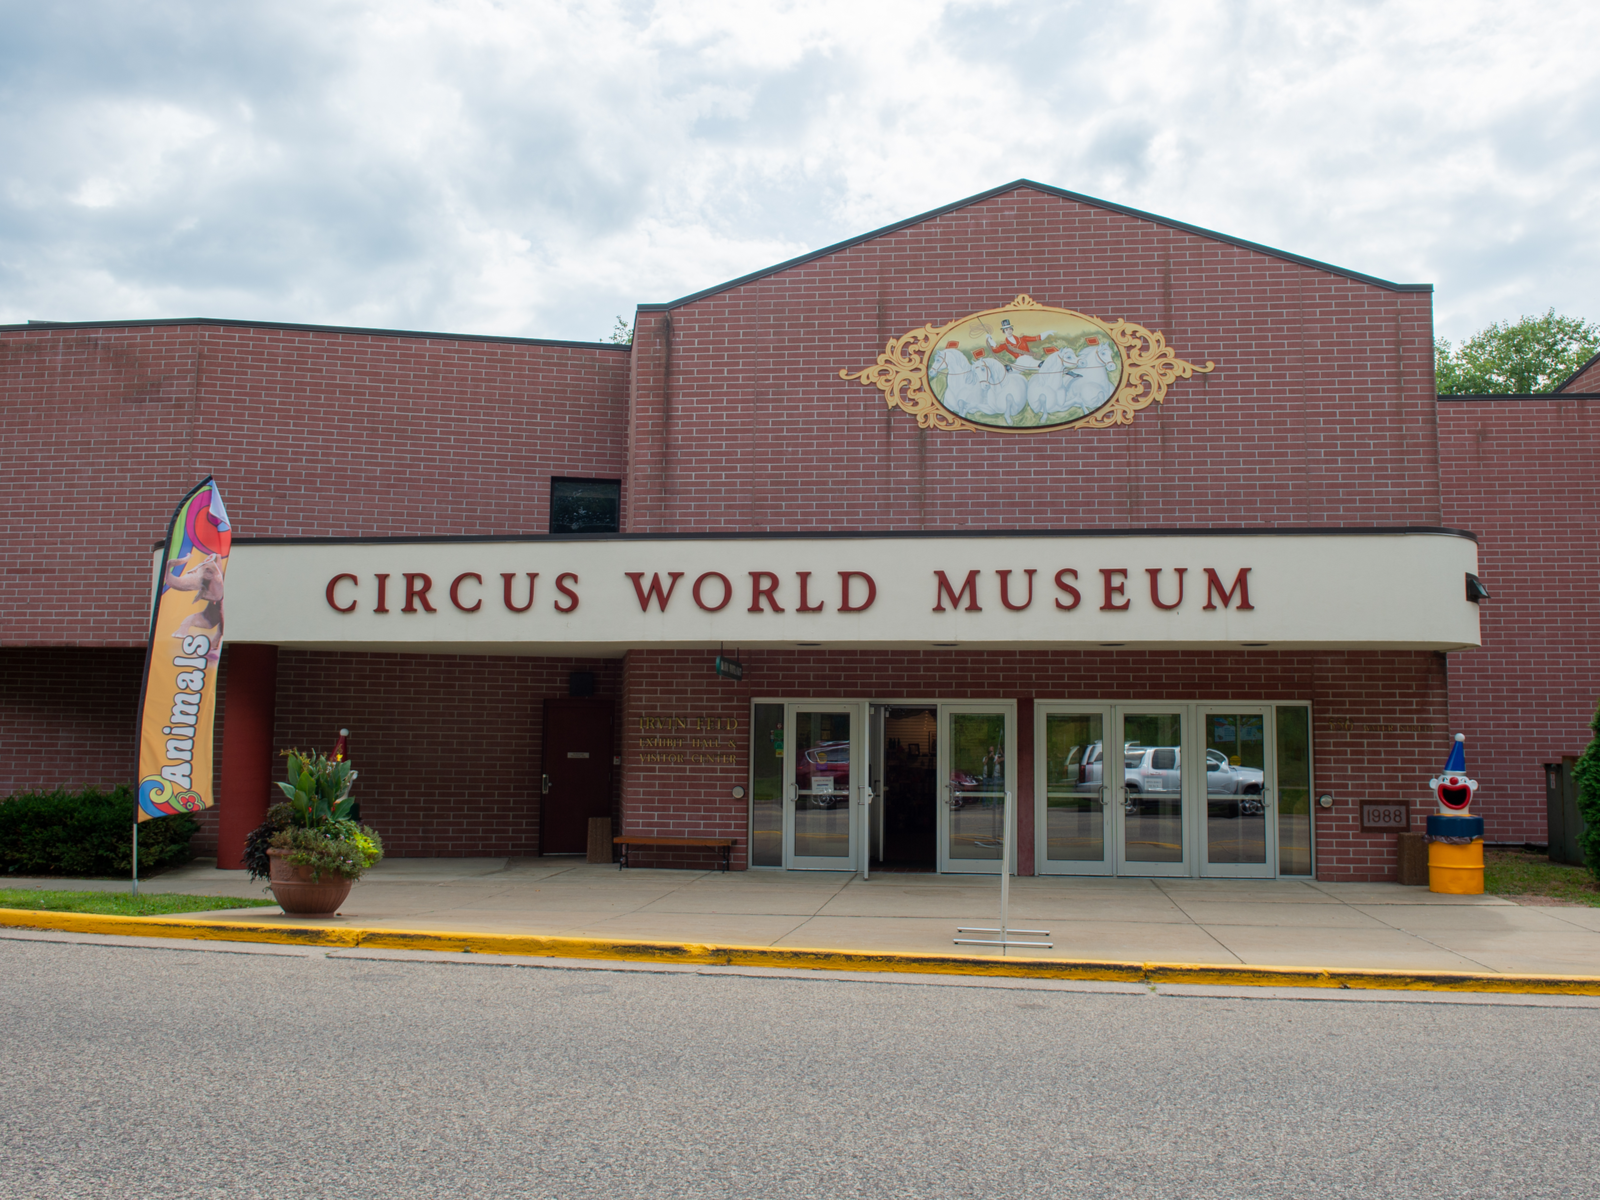 The entrance of the old Circus World Museum with brick walls and glass doors is one of the best Wisconsin tourist attractions